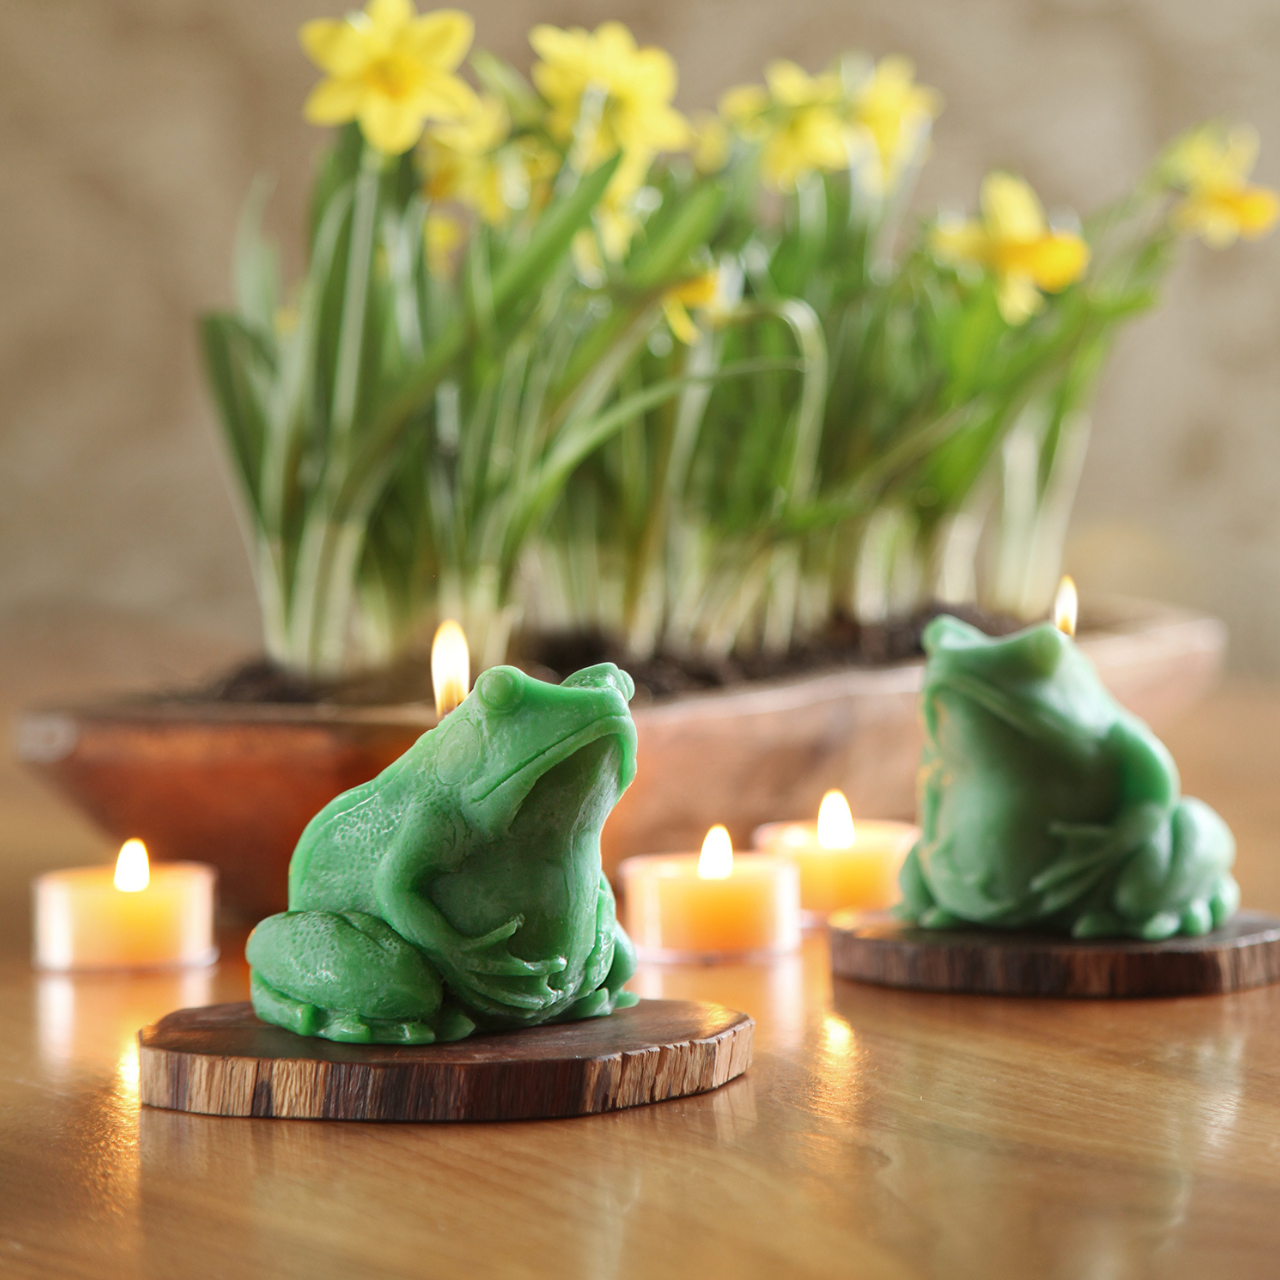 Two lit Beeswax Frog Candles sitting on a wooden table with lit tealights and yellow flowers in the background.